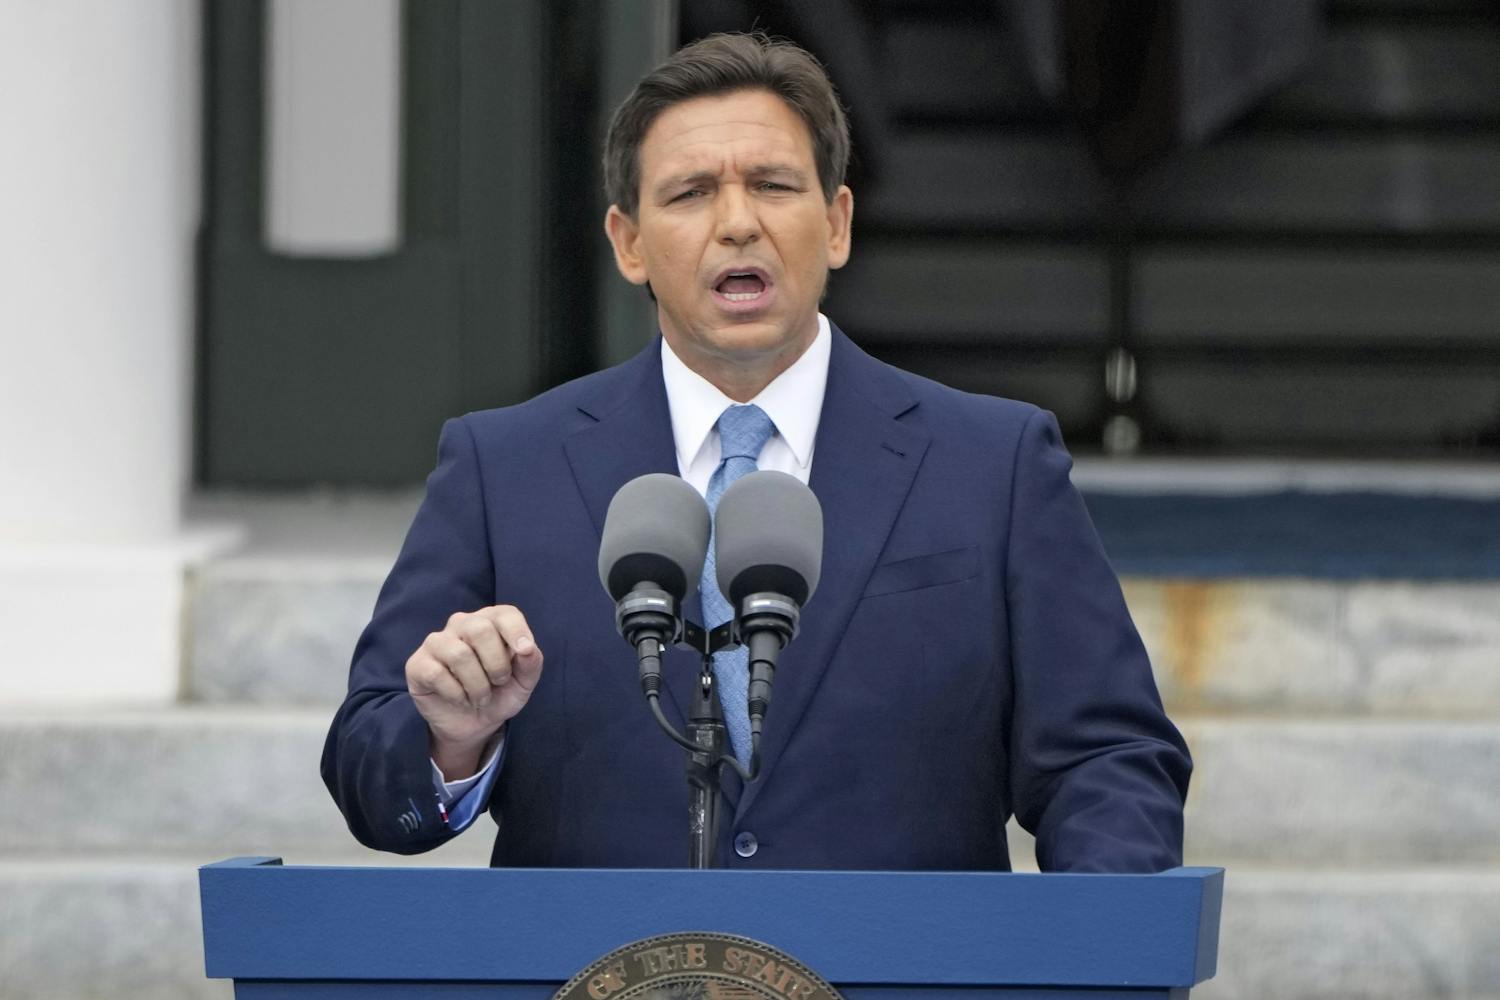 FILE - Florida Gov. Ron DeSantis speaks after being sworn in to begin his second term during an inauguration ceremony outside the Old Capitol on Jan. 3, 2023, in Tallahassee, Fla. (AP Photo/Lynne Sladky, File)